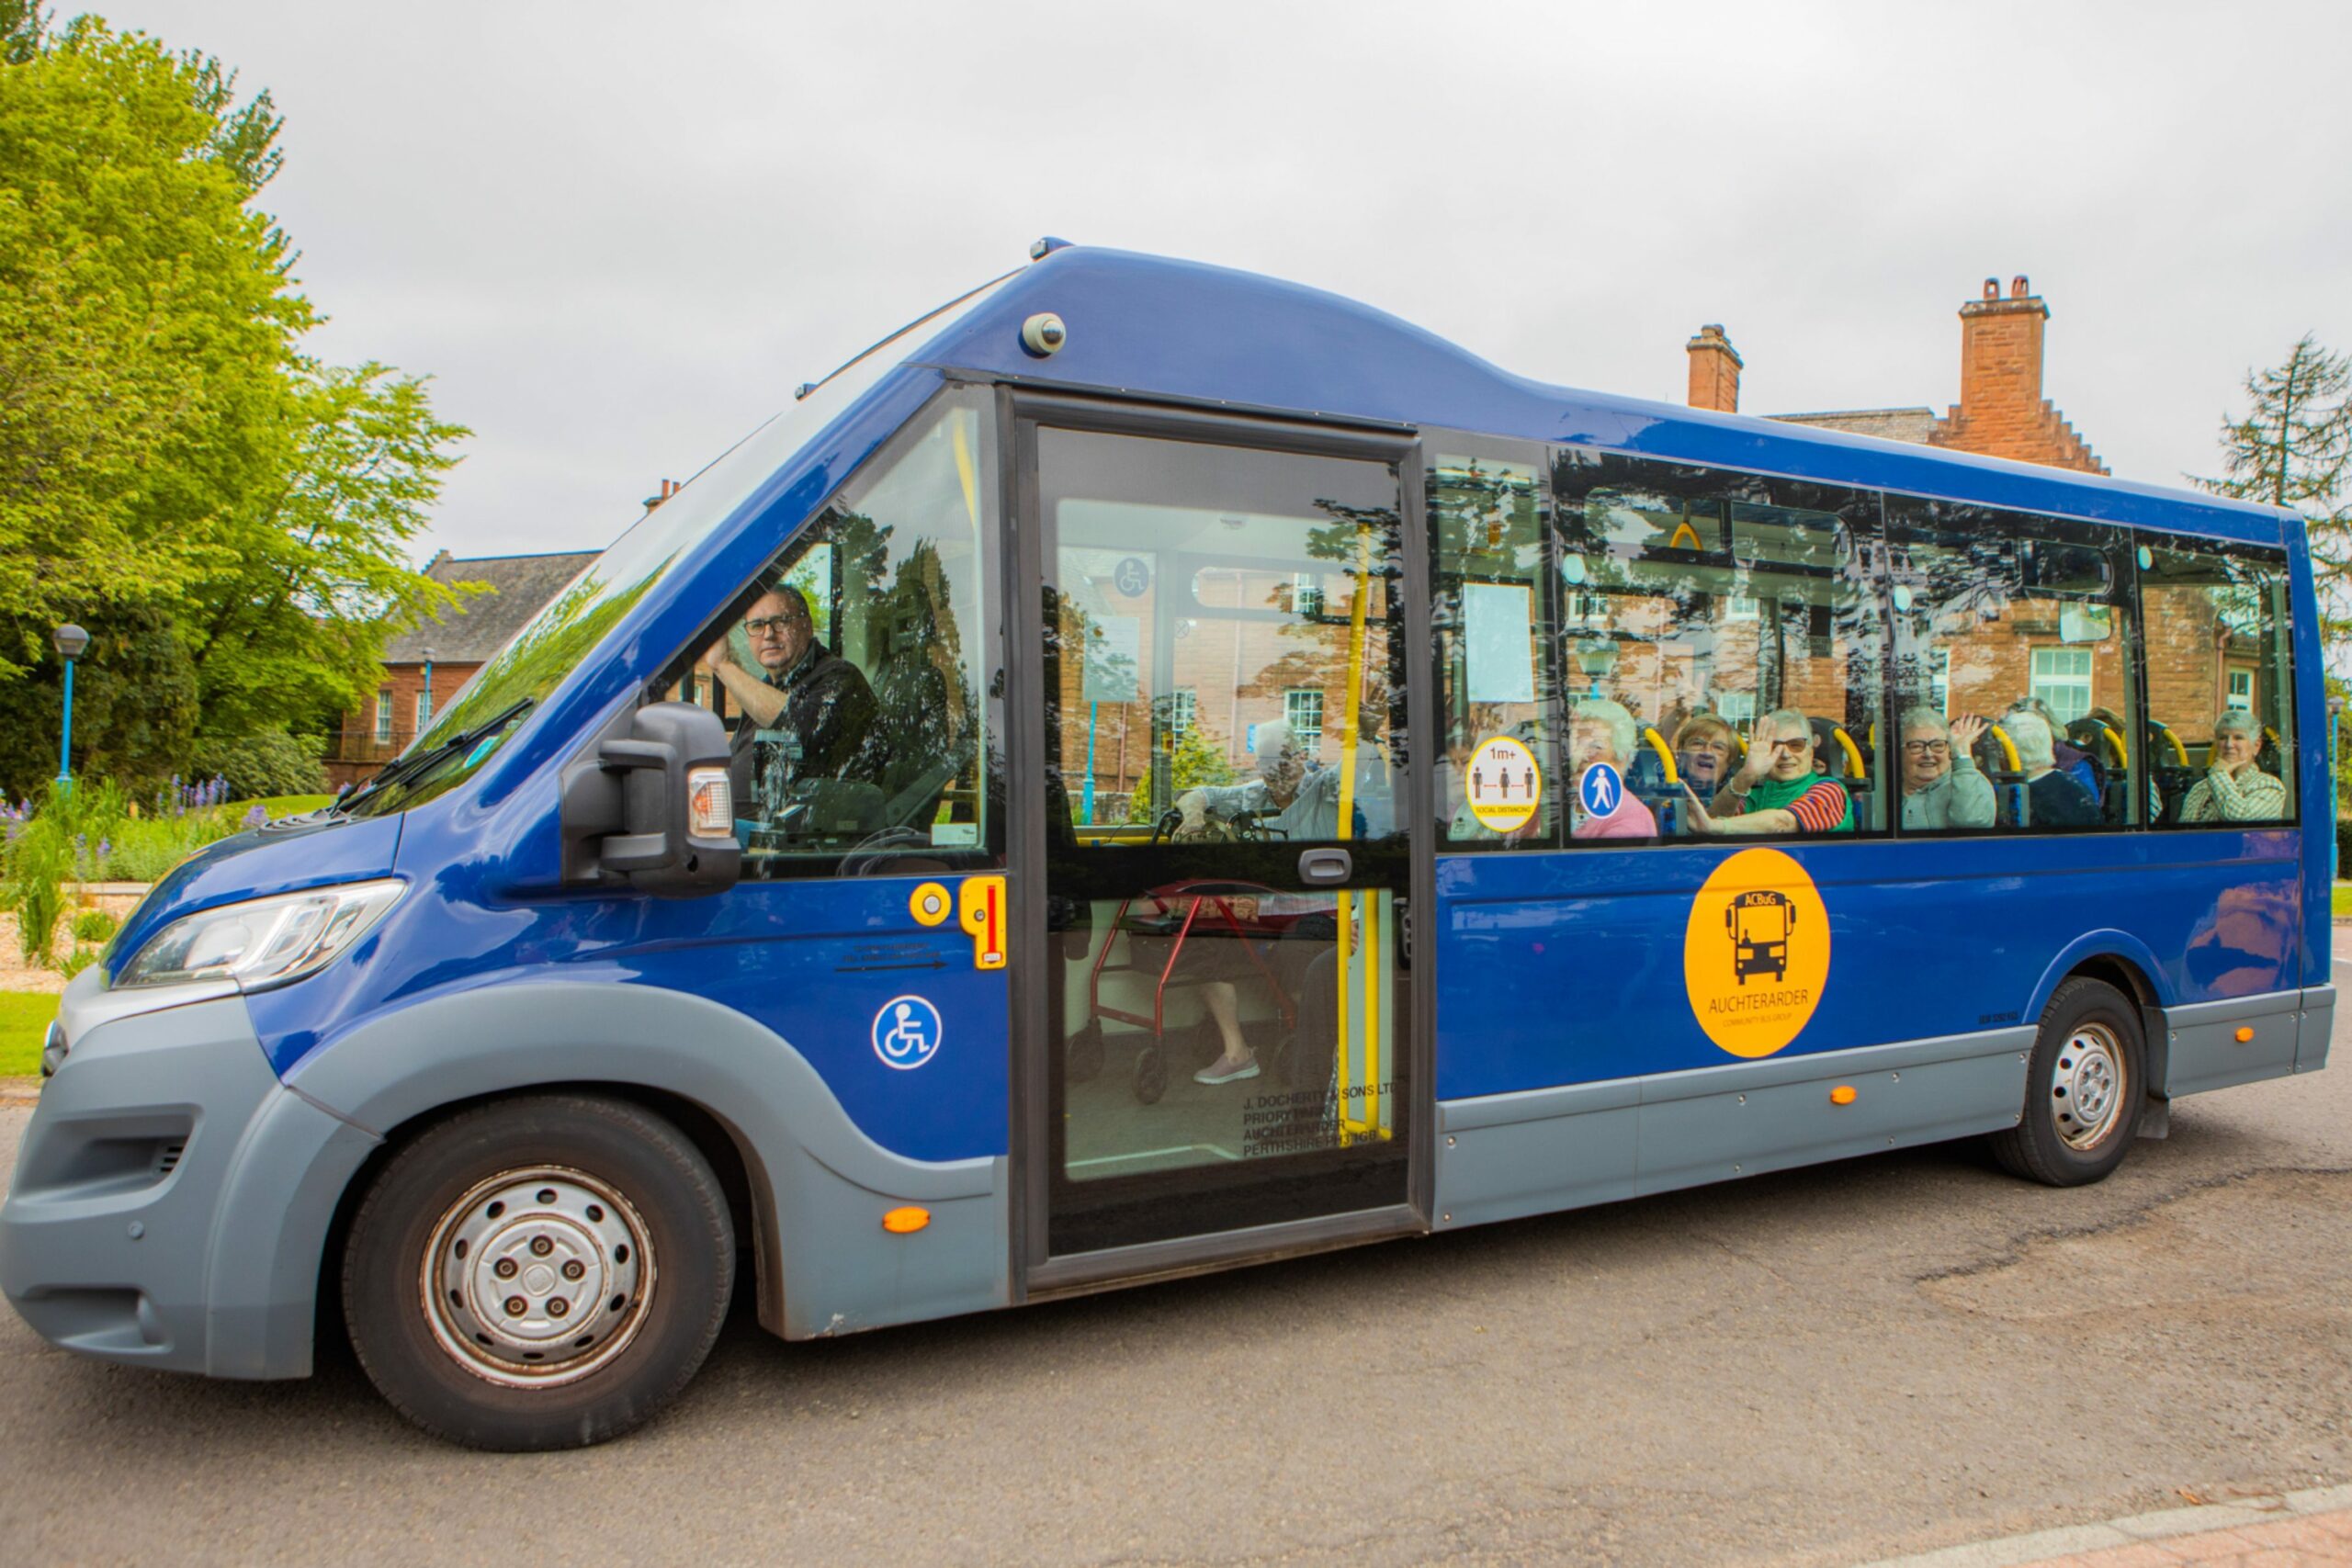 The bus is used by around 50 passengers a week.